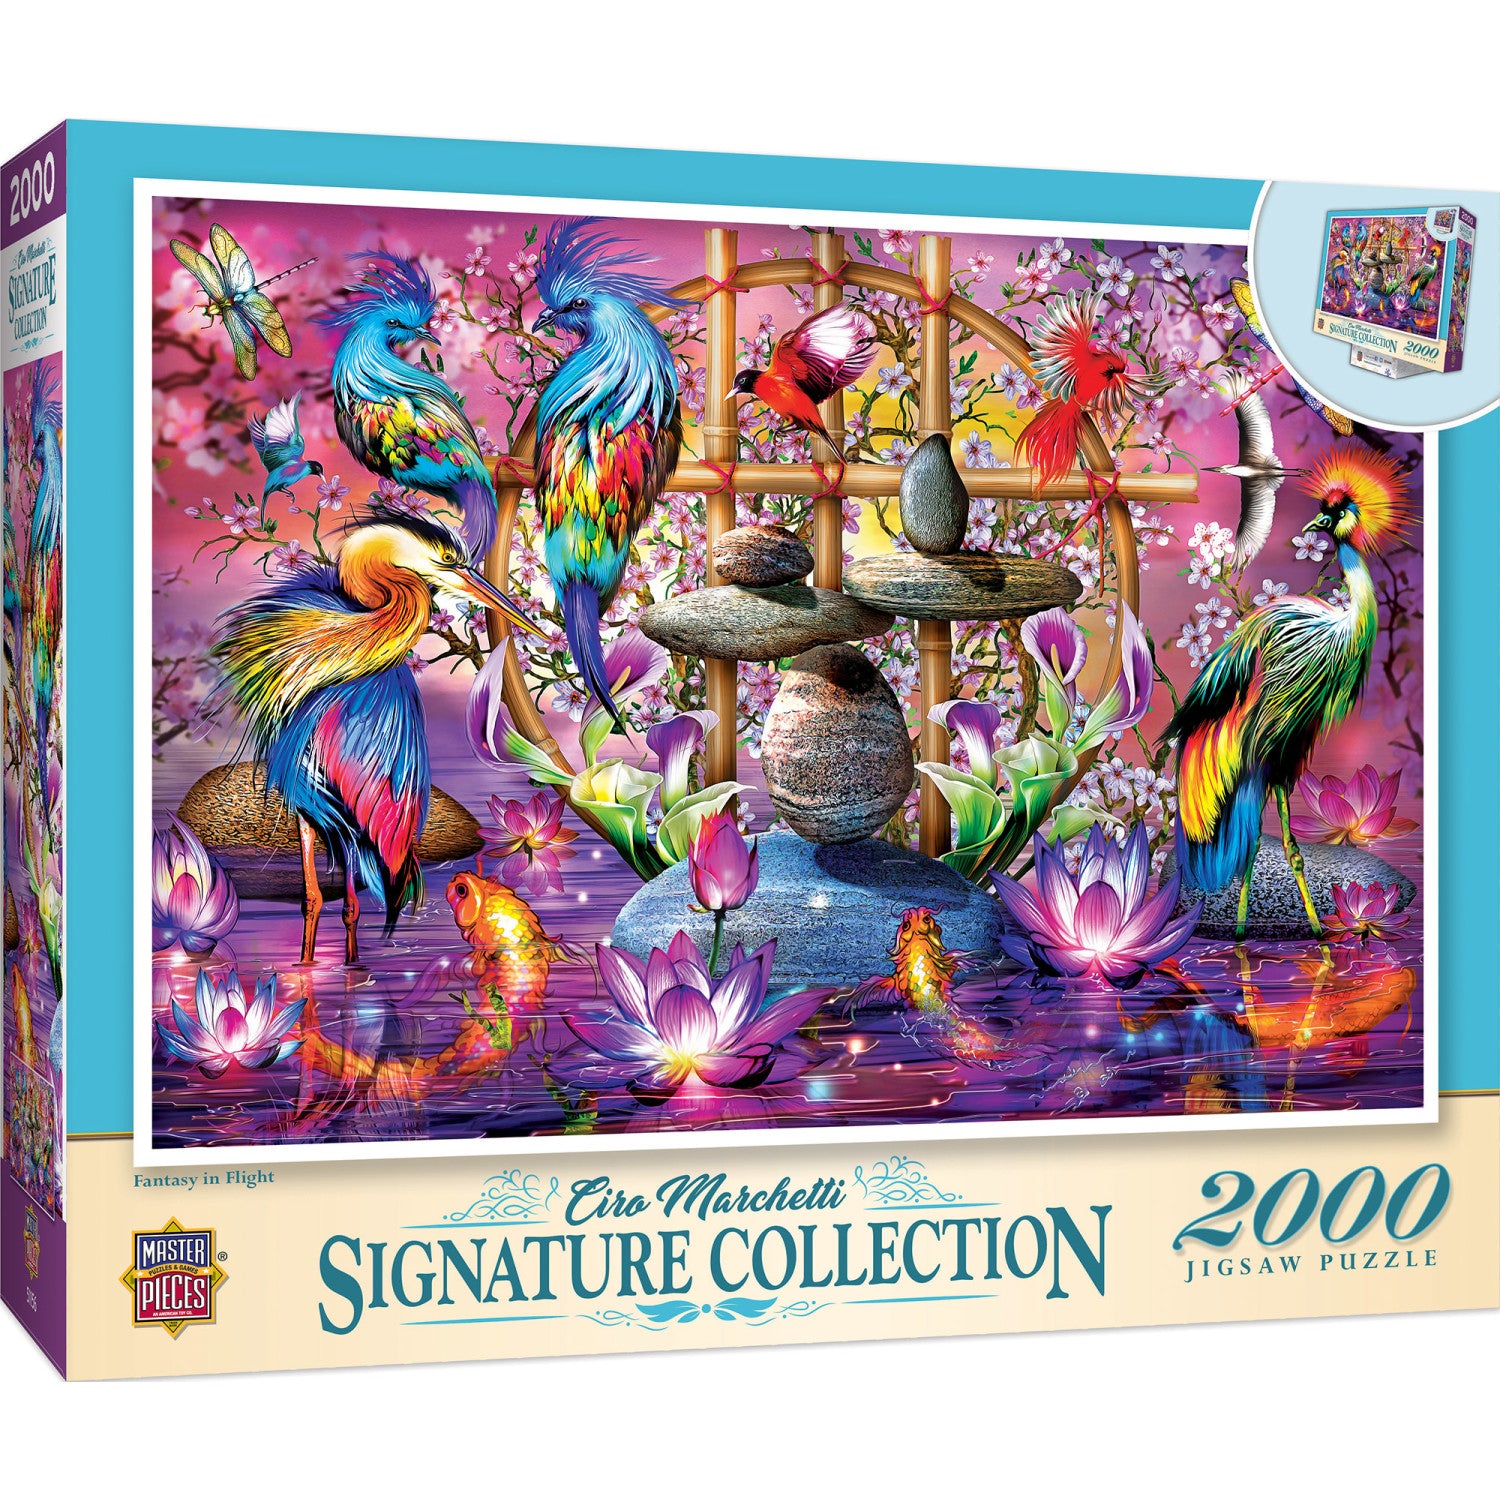 Signature Collection - Fantasy in Flight 2000 Piece Jigsaw Puzzle